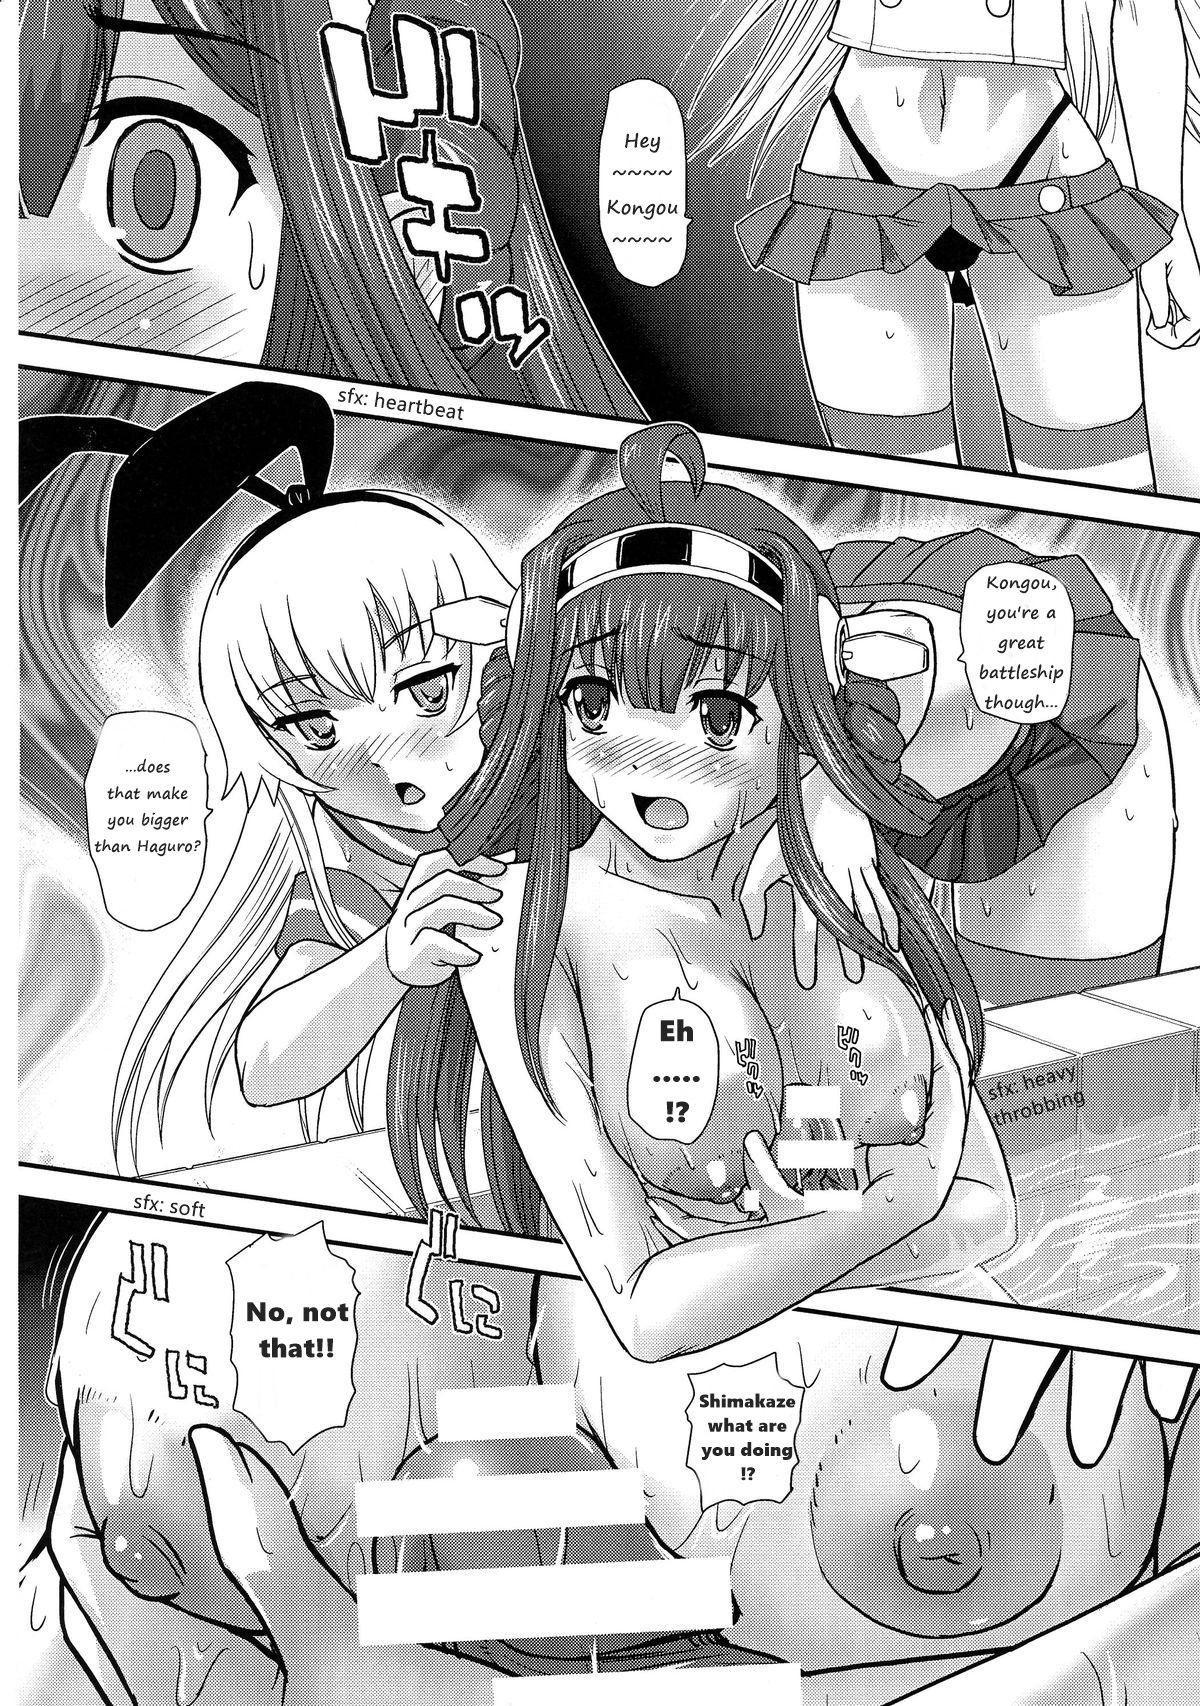 Tit Chinshufu!! - Kantai collection Arpeggio of blue steel Hunk - Page 10